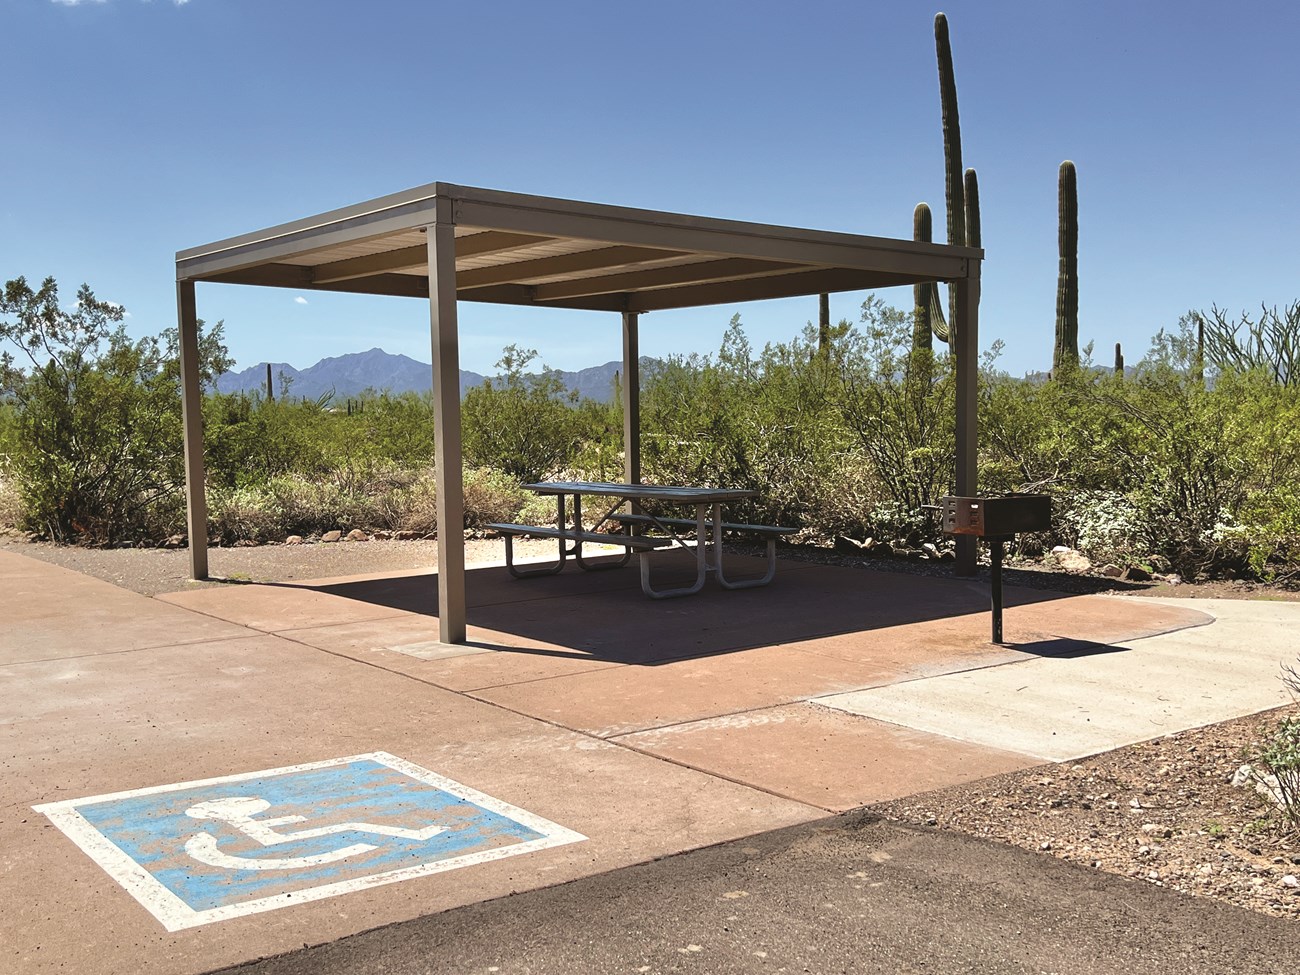 A campsite at Twin Peaks Campground is marked with the accessible symbol. the site is paved and level, and features a picnic table and shade ramada.